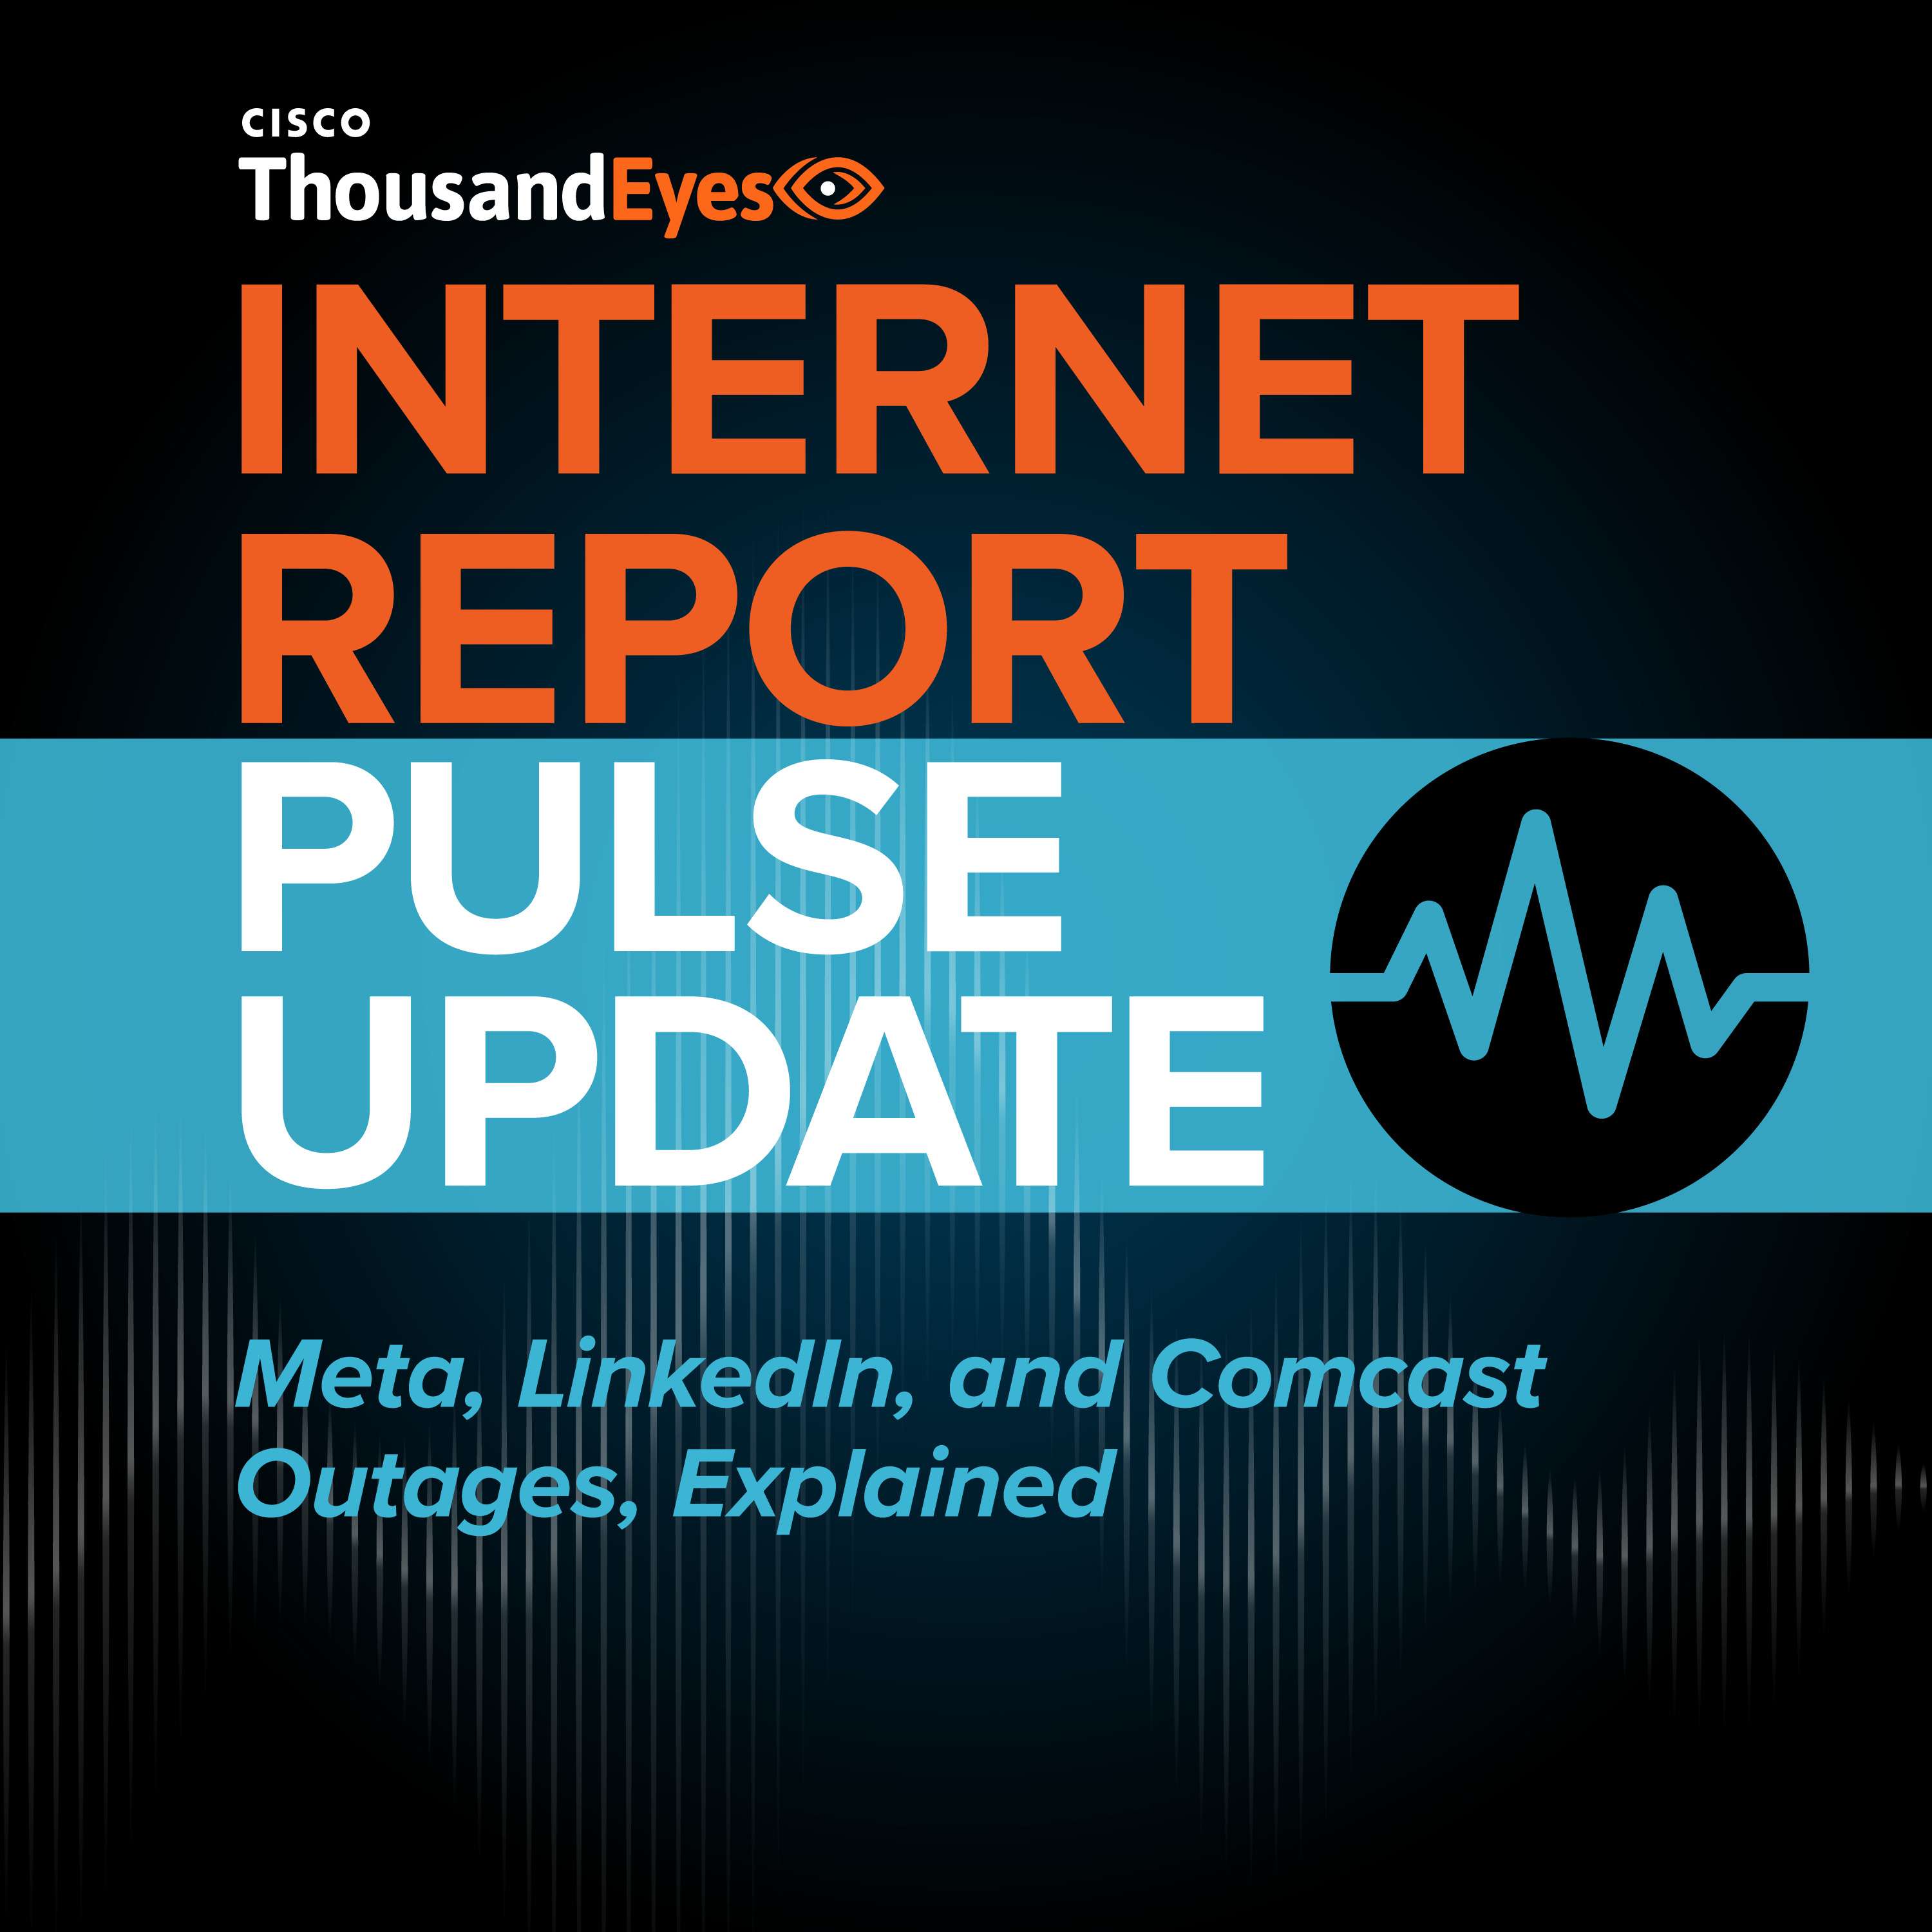 Meta, LinkedIn, and Comcast Outages, Explained | Pulse Update